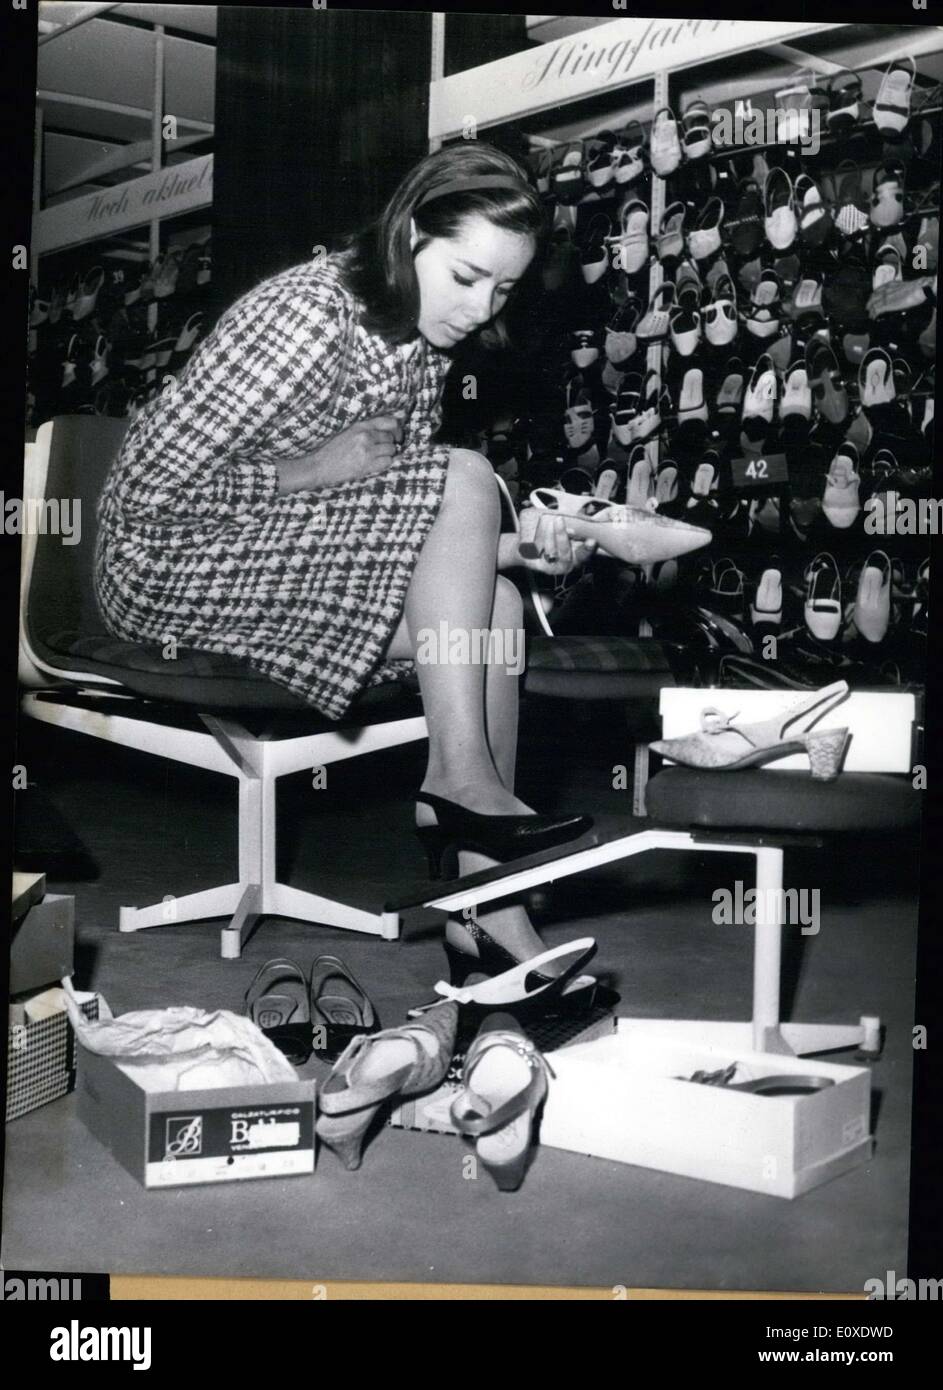 Jun. 25, 1966 - Berlin Actress Monika Peitsch has a soft spot for shoes. Wherever the actress goes she has to check out the shoe stores. Her shoe rack at home is already overfilled! She is pictured in Berlin, where she is filming a new Edgar-Wallace Film. Of course she is shoe shopping on her free time. Stock Photo